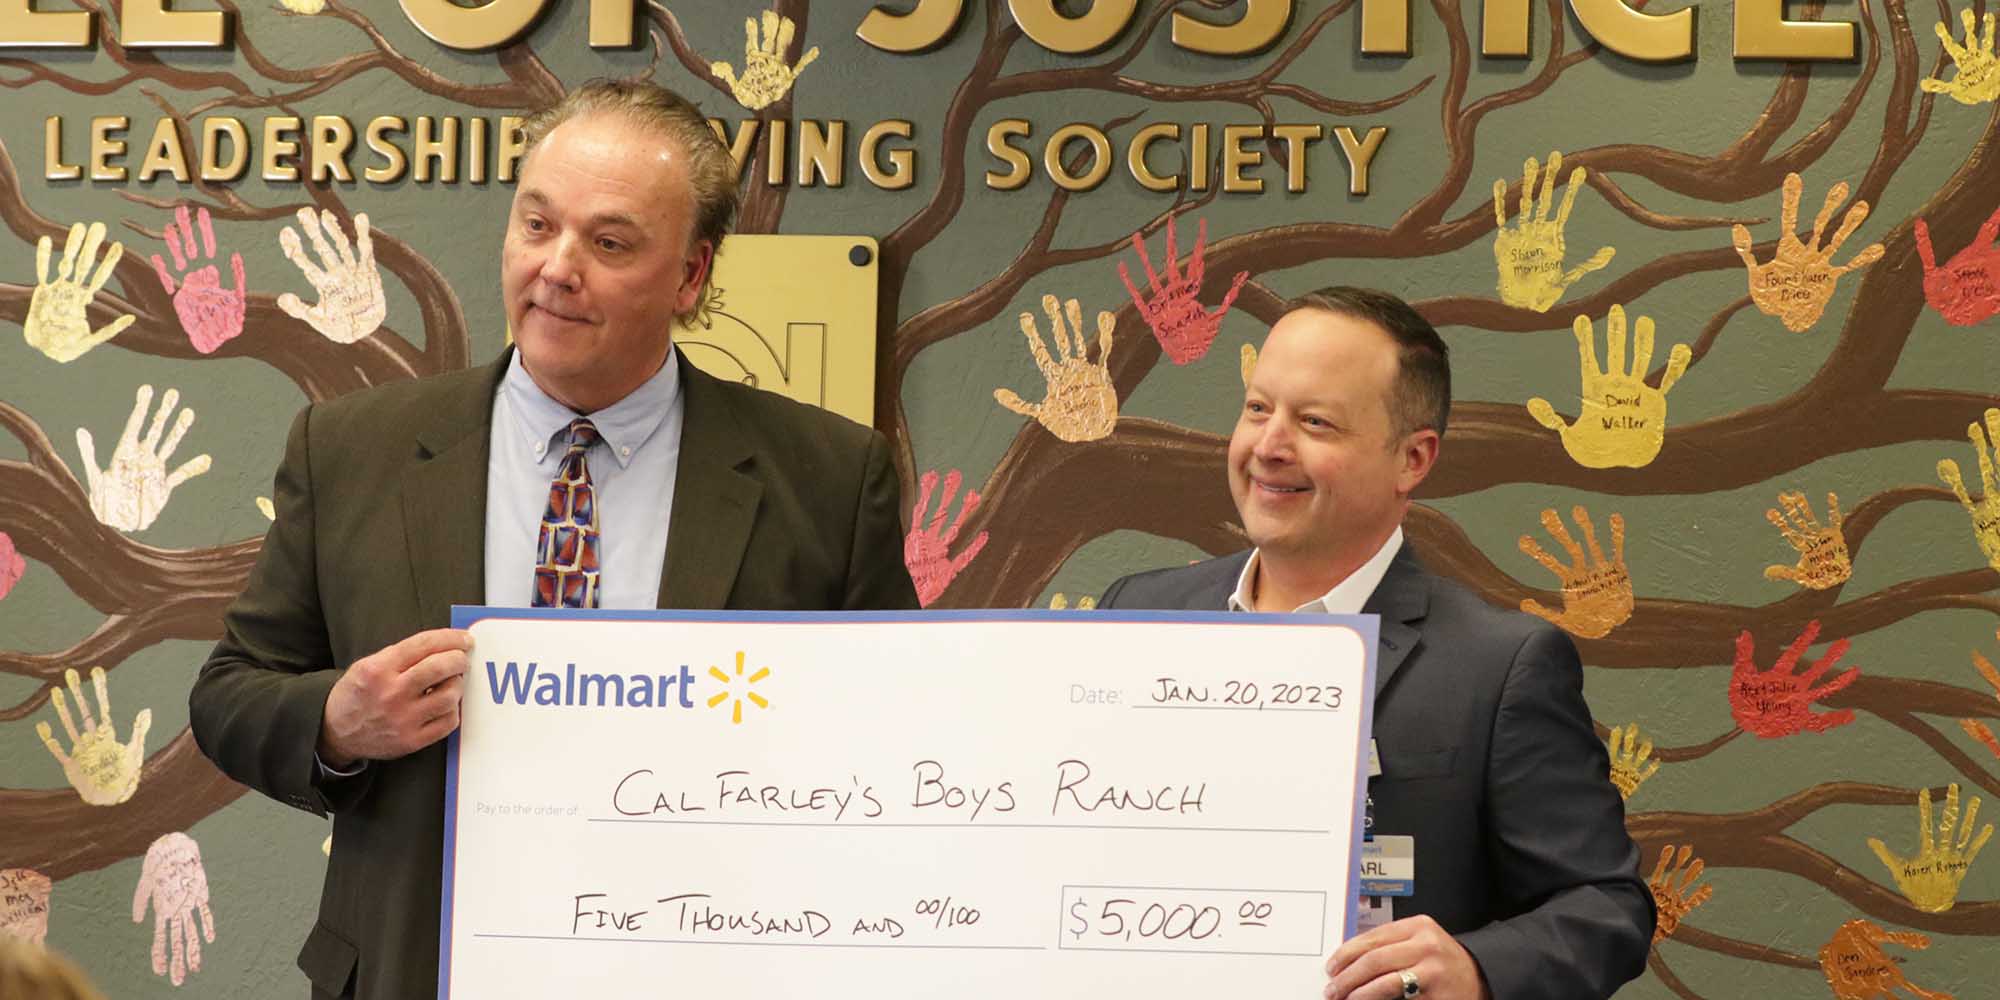 Cal Farley's Boys Ranch President and CEO Richard Nedelkoff receives a check from Carl Carruthers of Walmart.